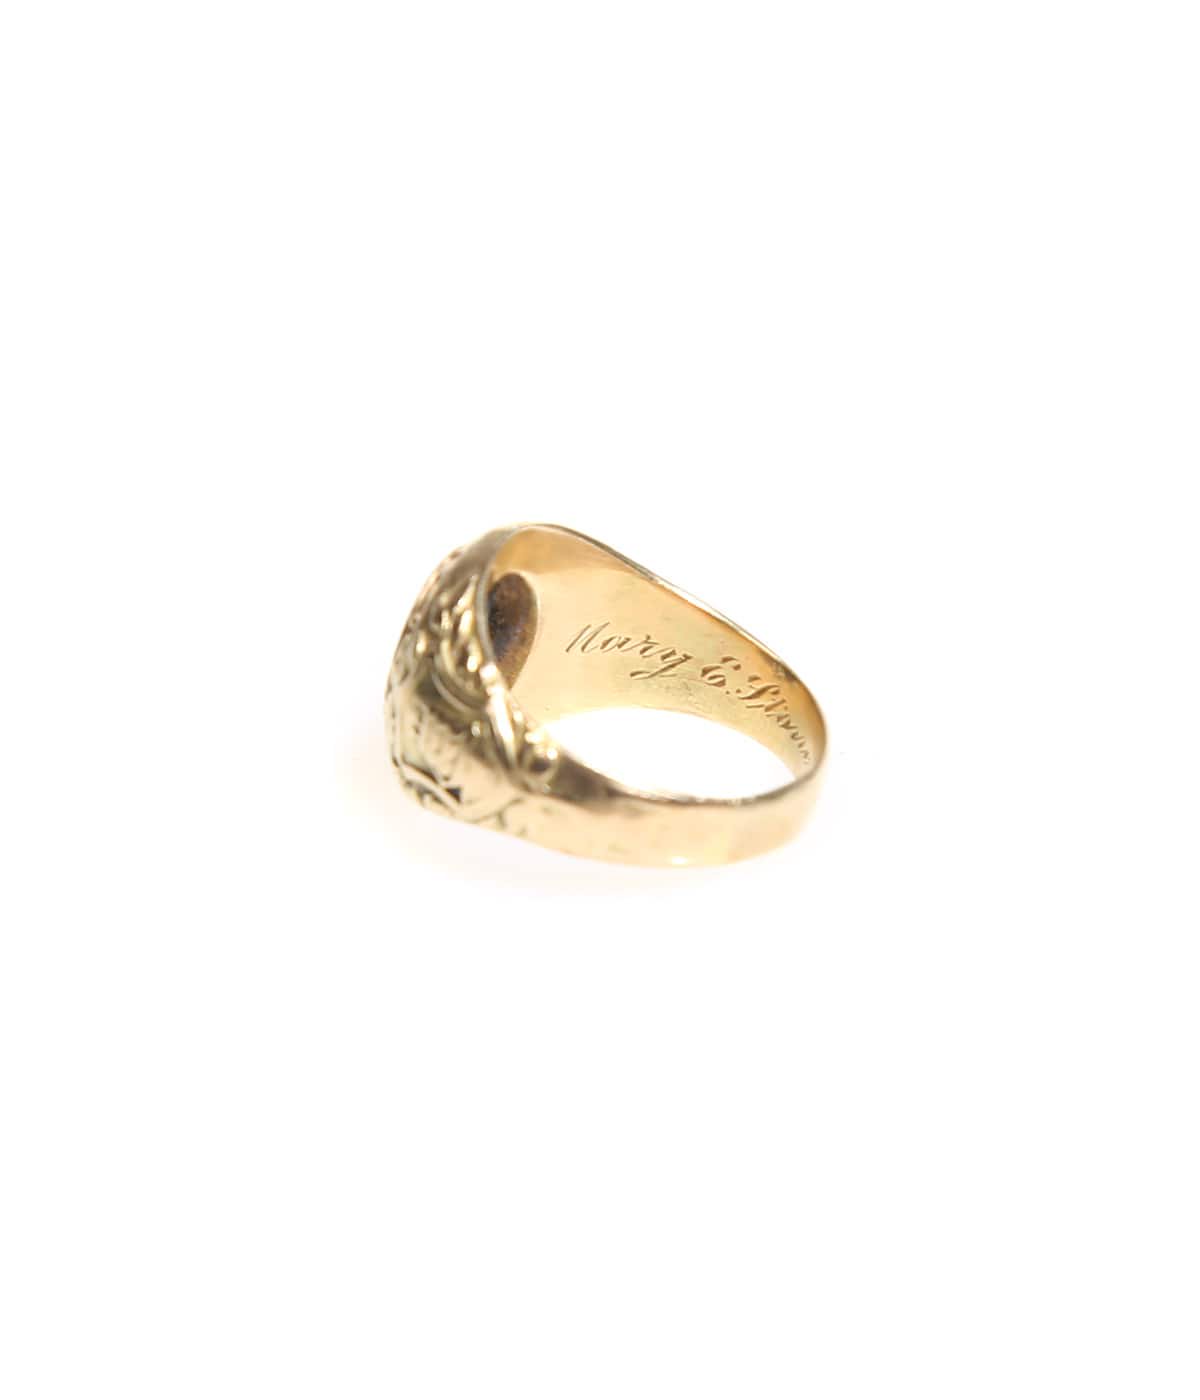 VINTAGE TIFFANY NEW ROCHELLE COLLEGE RING